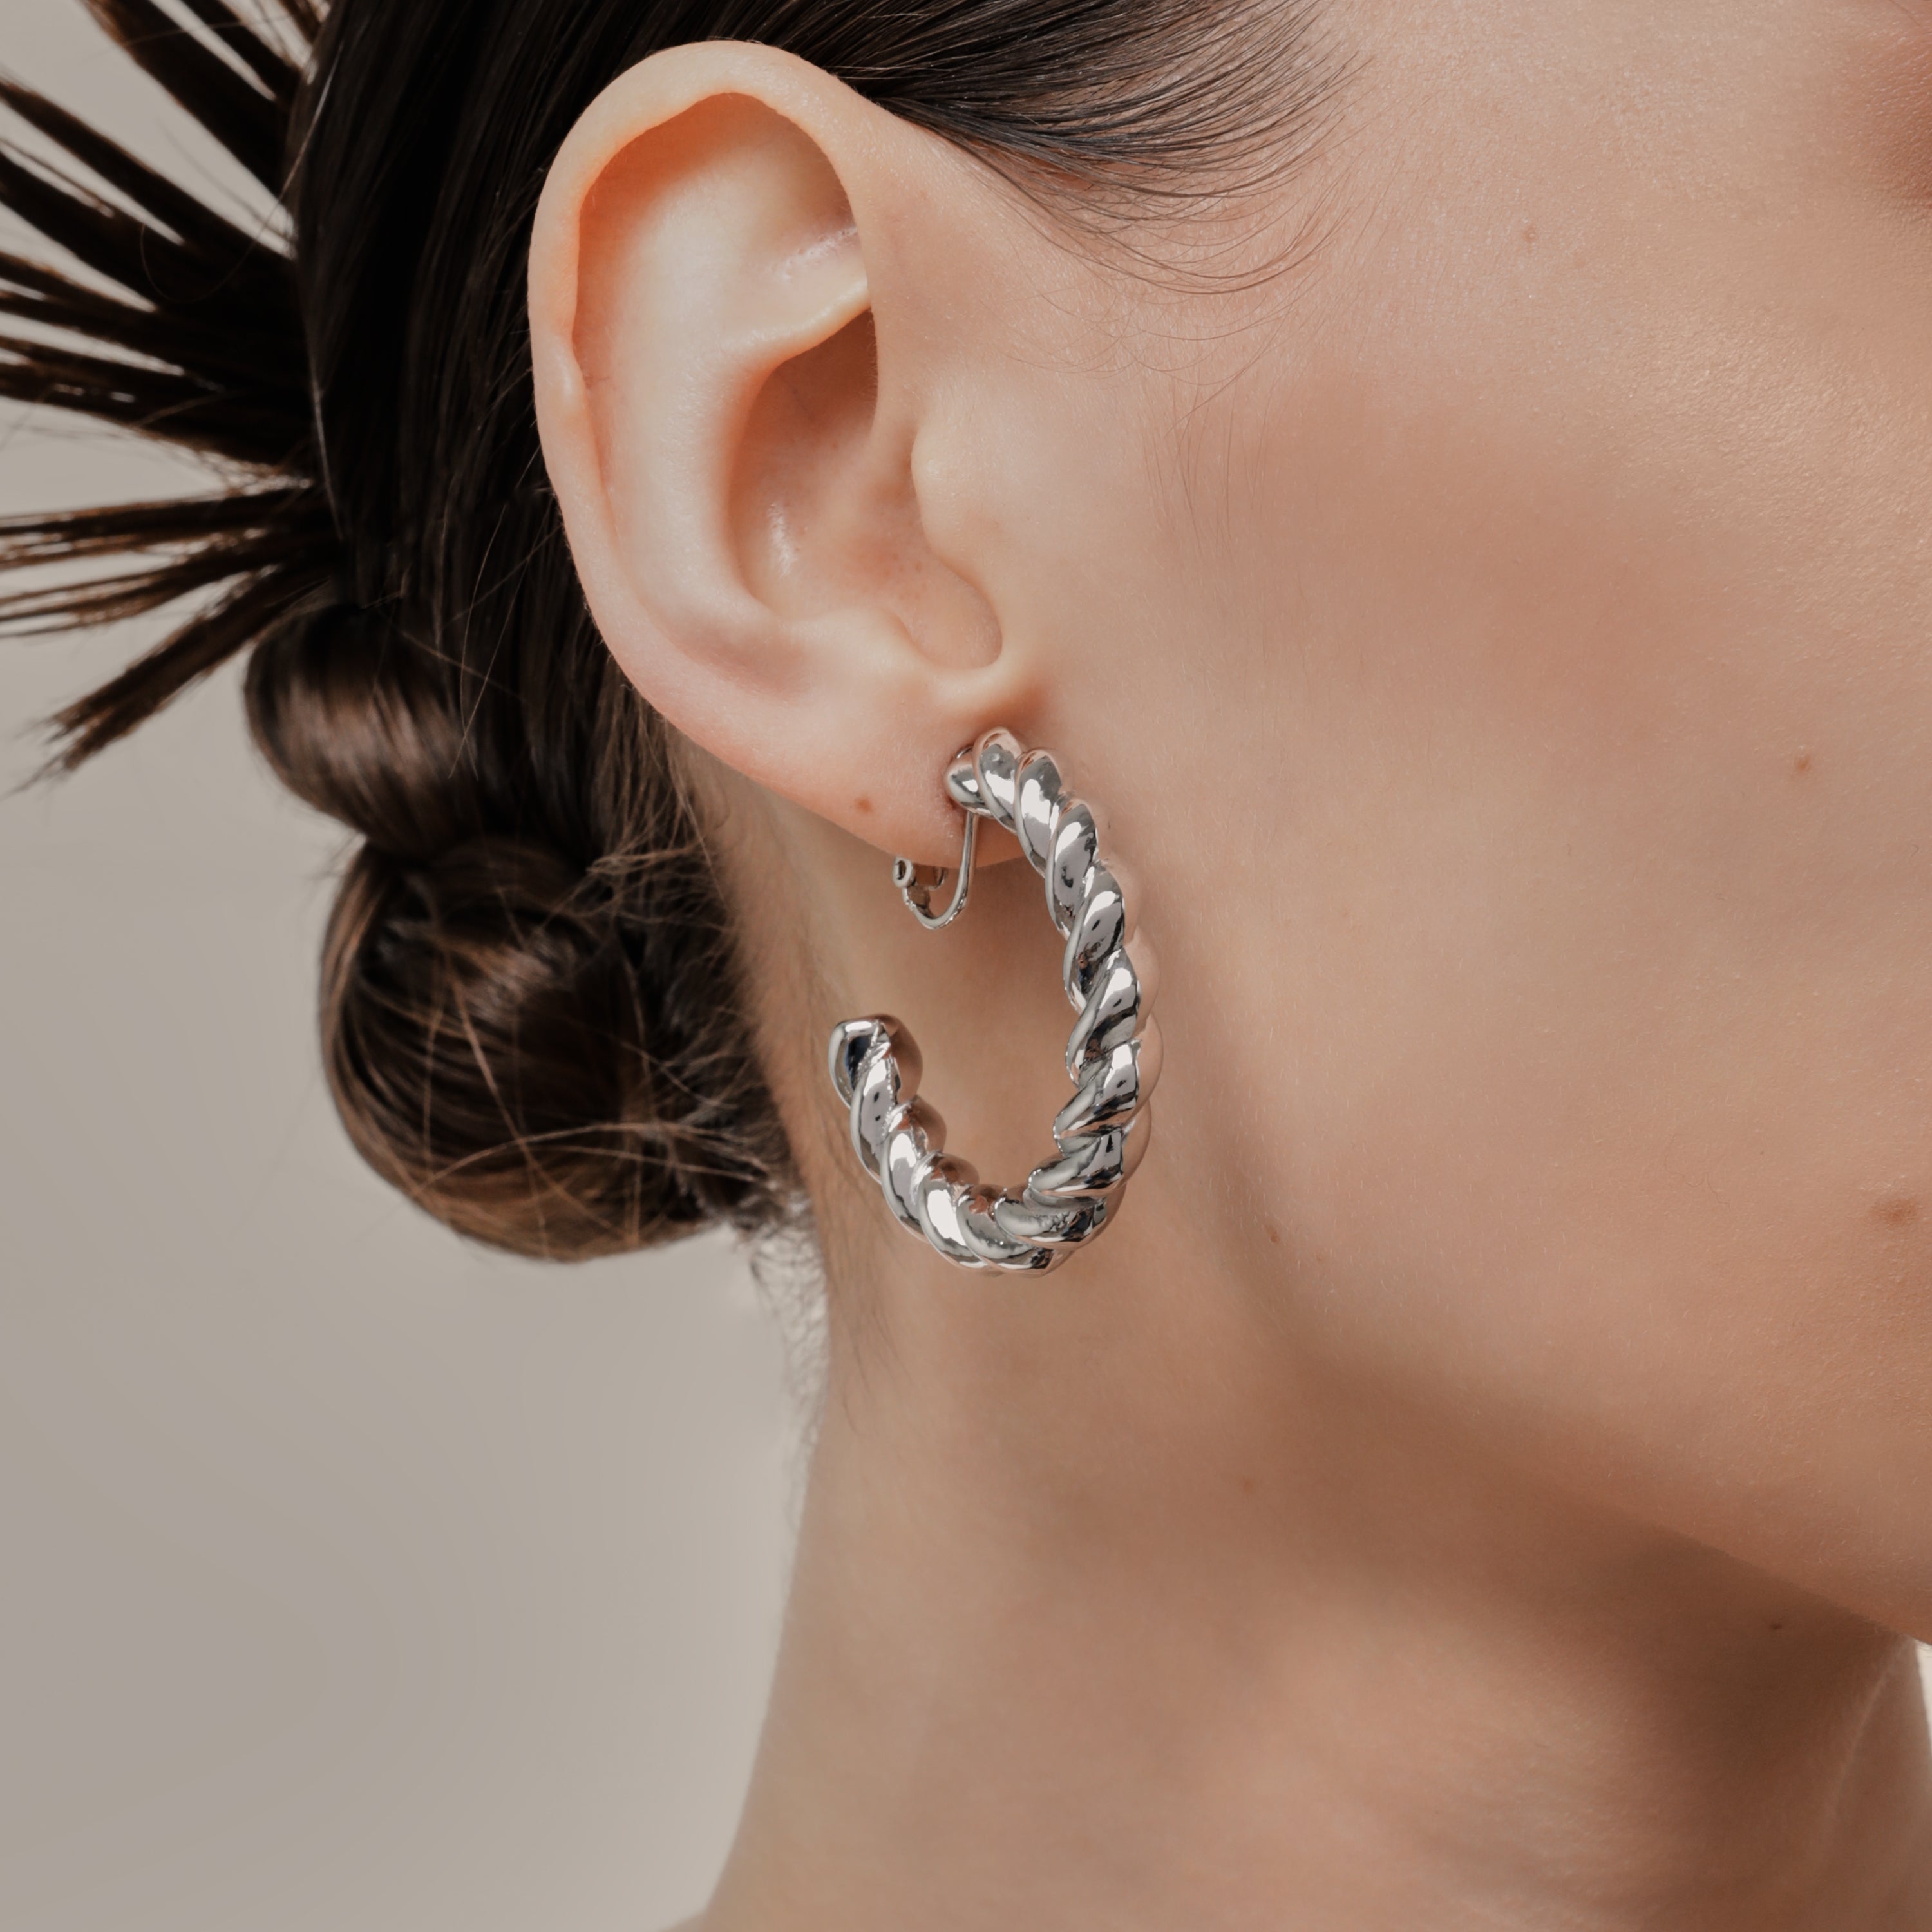 A model wearing the Large Croissant Hoop Clip On Earrings in Silver. These elegant hoops are equipped with a secure screwback closure and adjustable fit to keep them in place all day, even for those with sensitive or keloid prone ears. Enjoy up to 12 hours of comfortable wear in style.